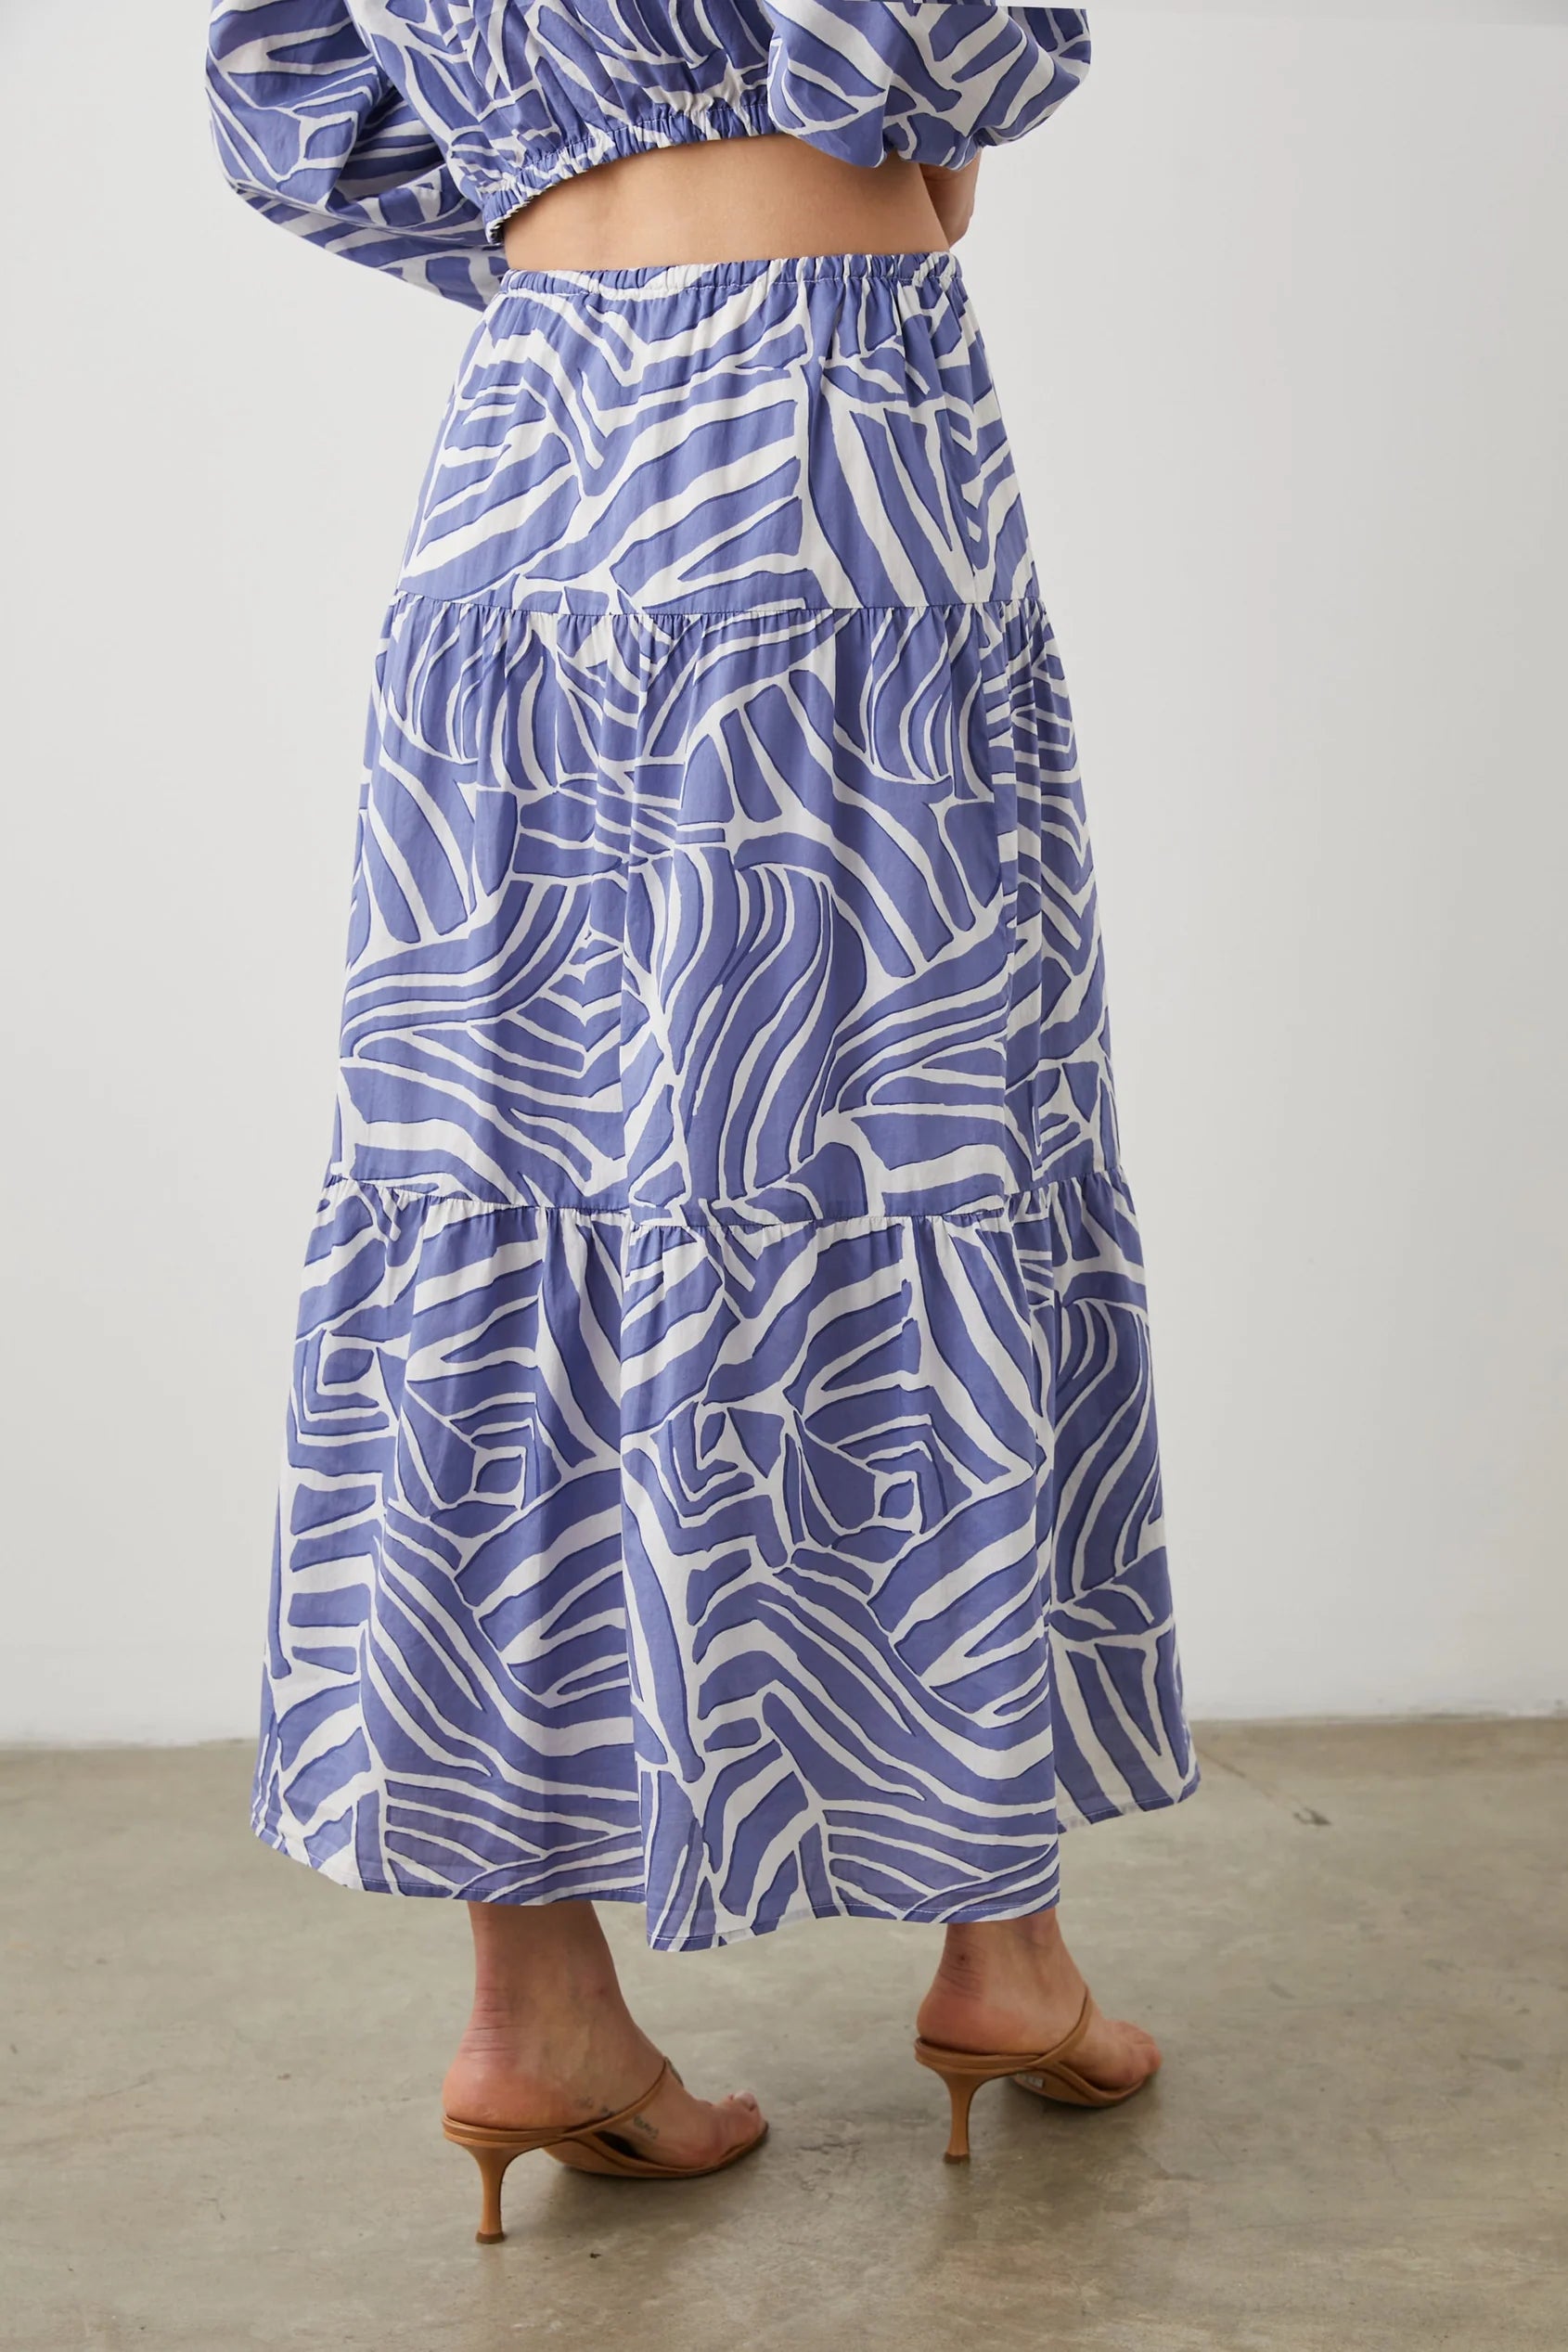 Midi skirt with white and cornflower blue geometric pattern fully lined with triple tiers